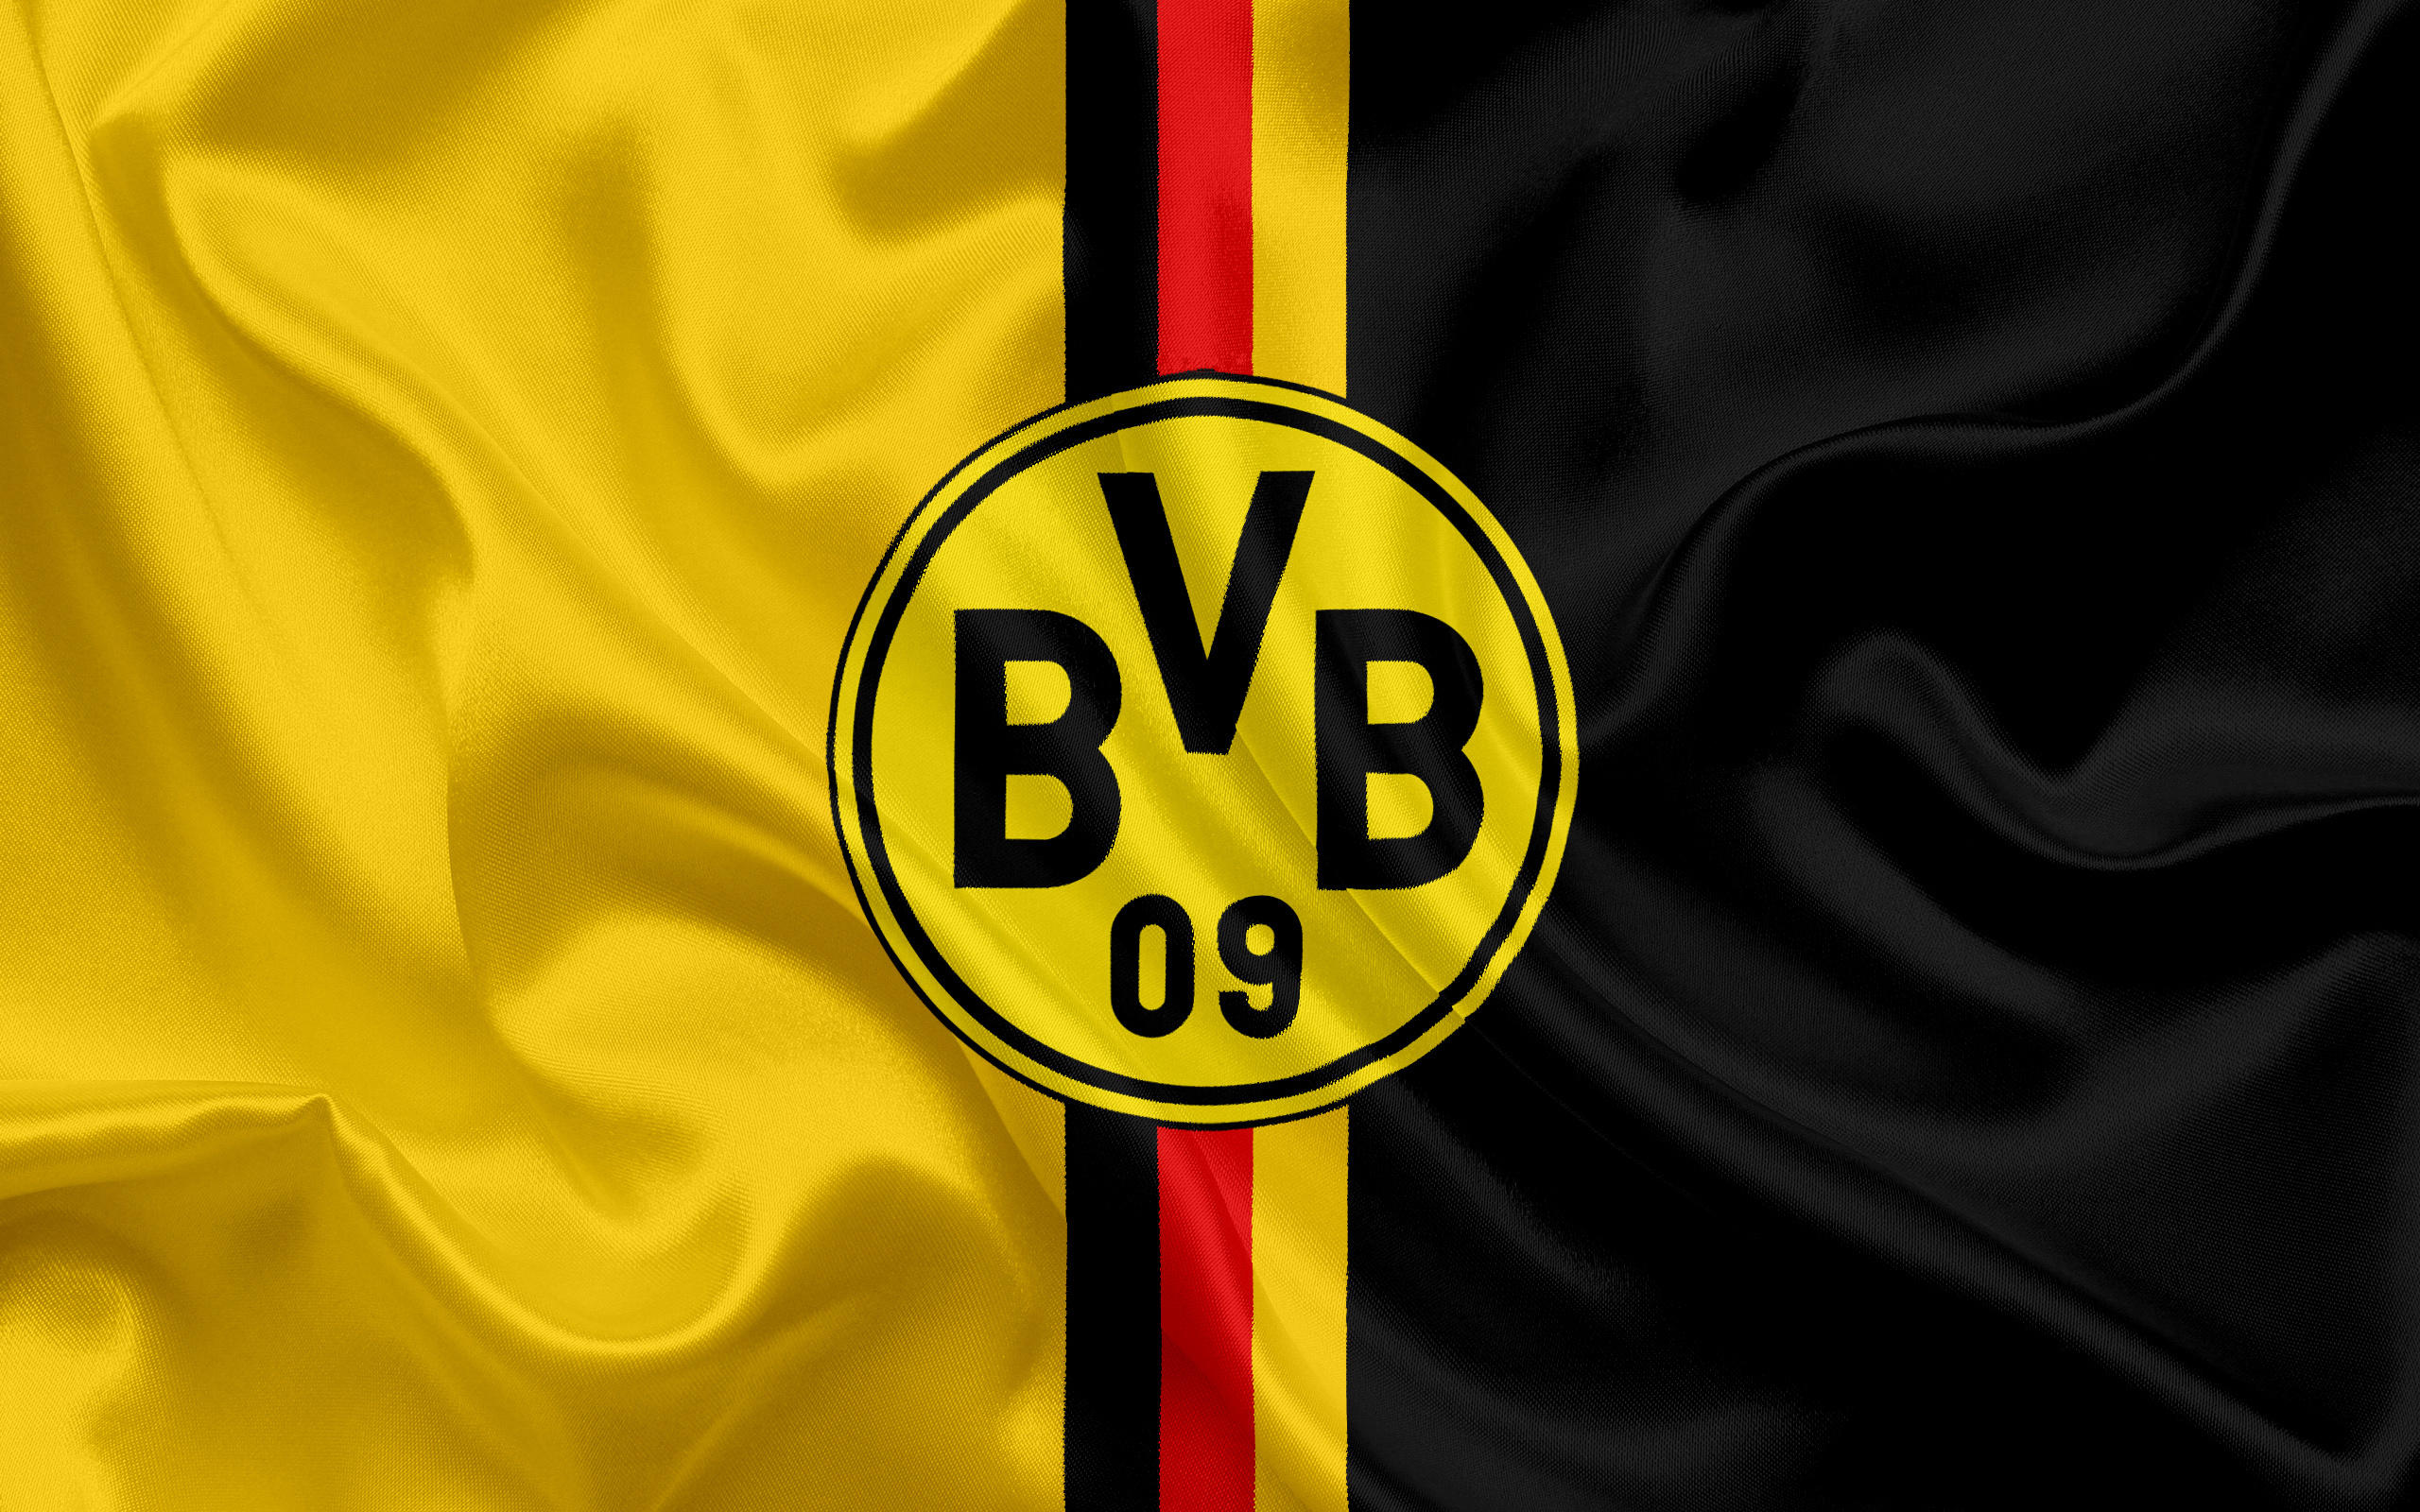 Borussia Dortmund: The second largest sports club by membership in Germany. 2560x1600 HD Wallpaper.